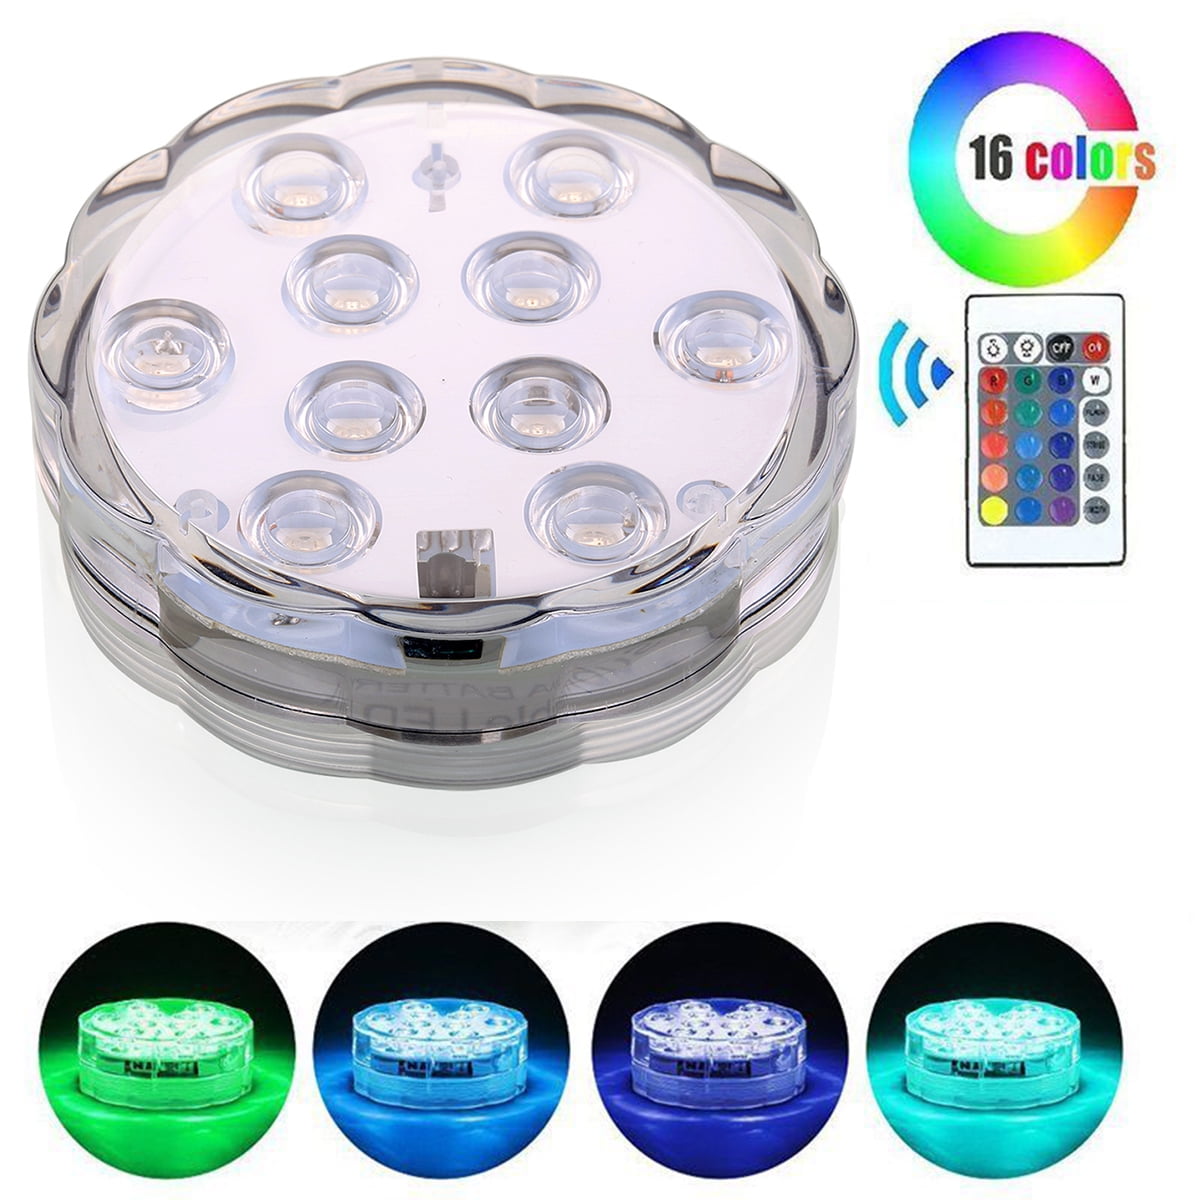 Swimming Pool Spa LED Underwater Light RGB 16 Color Remote Control 10 LED Kit